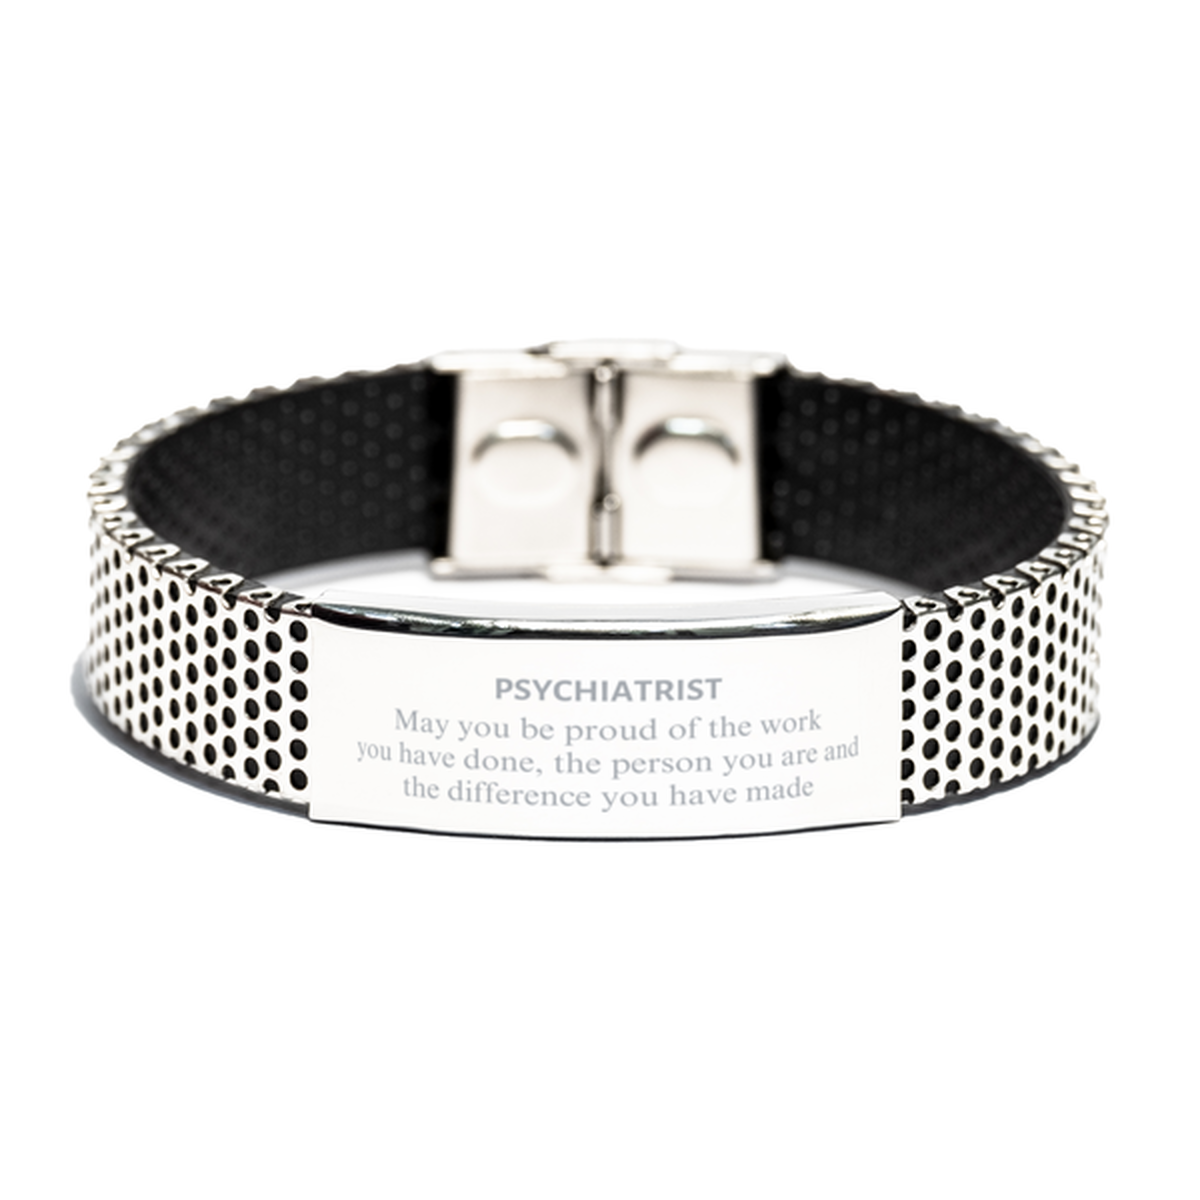 Psychiatrist May you be proud of the work you have done, Retirement Psychiatrist Stainless Steel Bracelet for Colleague Appreciation Gifts Amazing for Psychiatrist